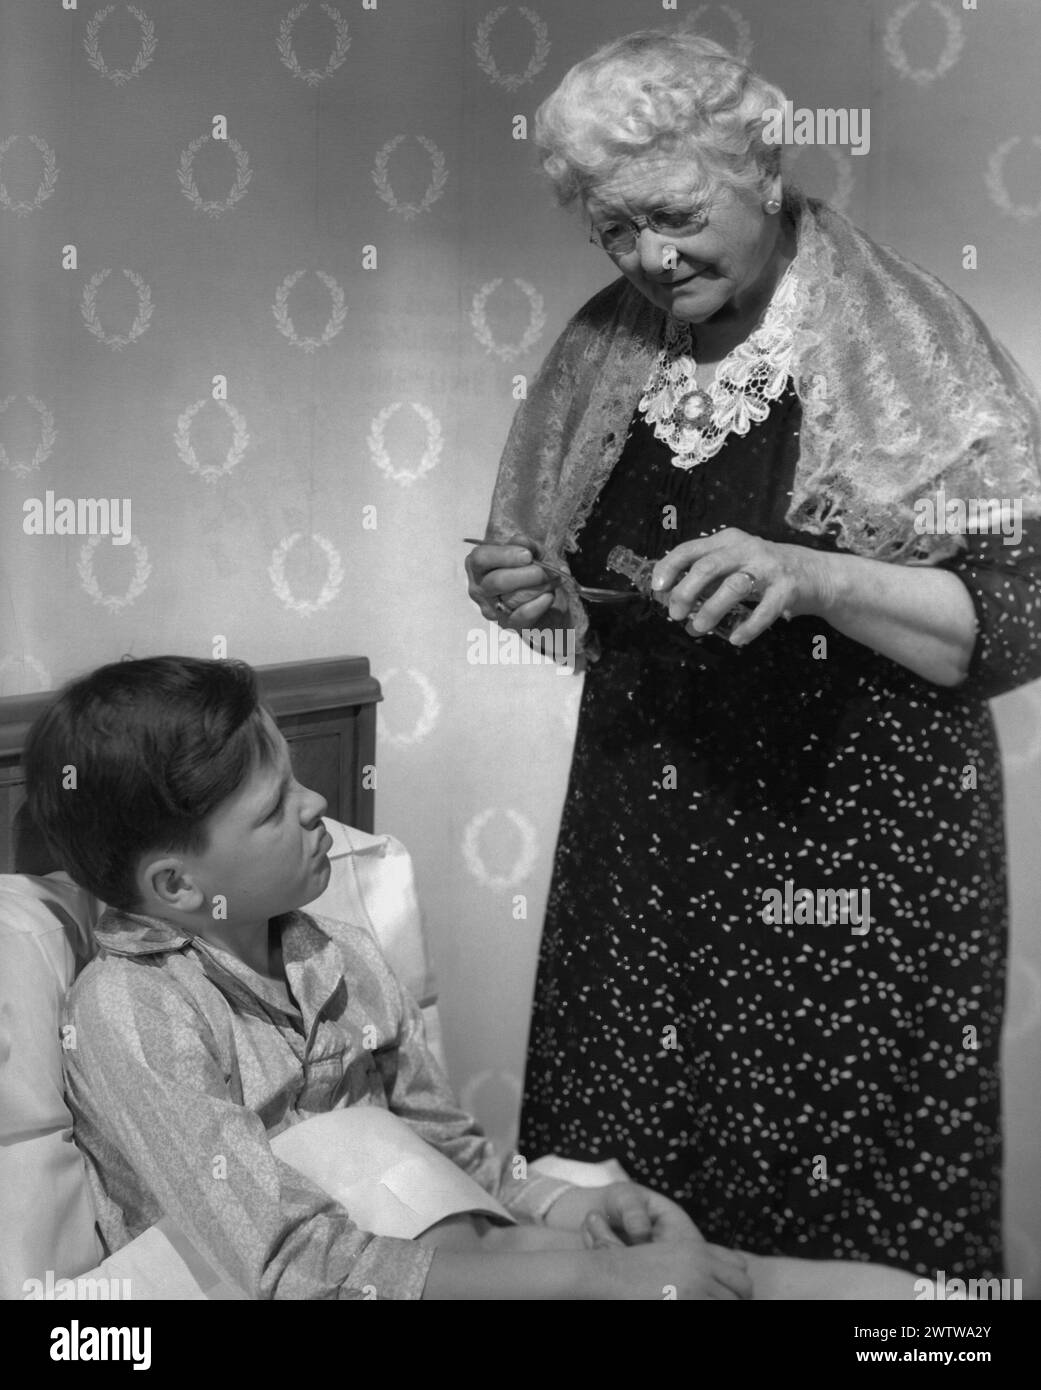 Older white-haired grandma with a dress and a shawl over her shoulders, standing bedside her grandson as she pours liquid medicine from a bottle into the spoon for him Stock Photo